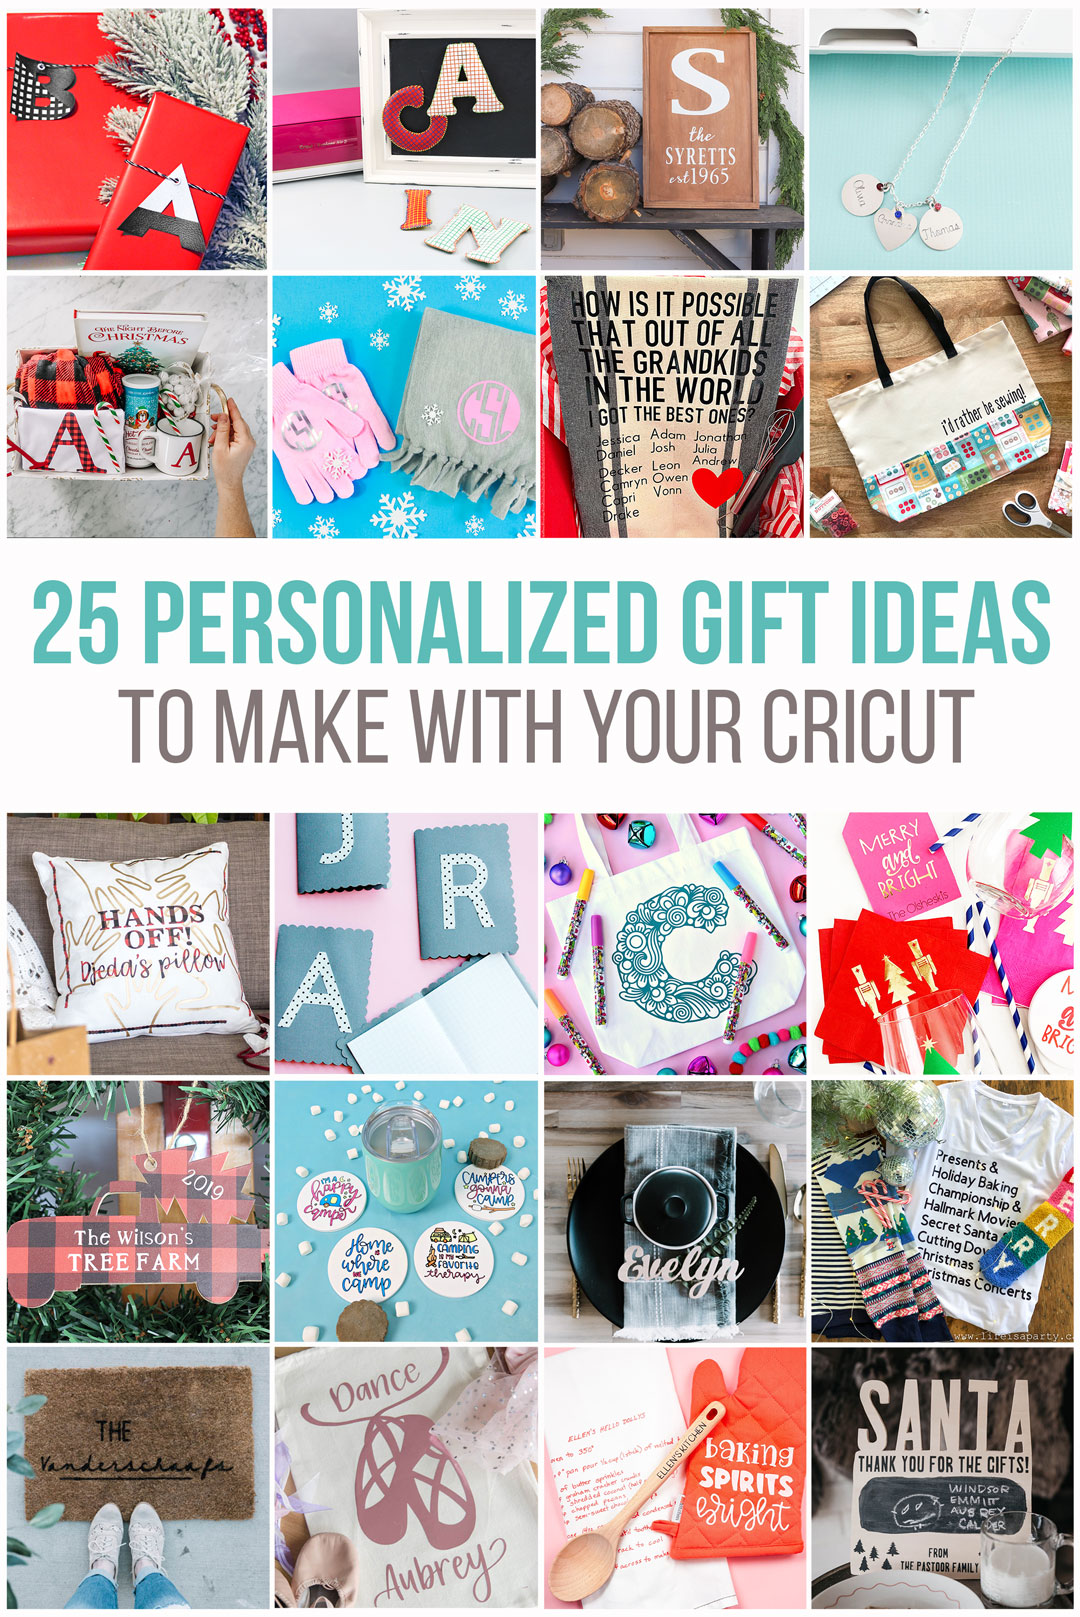 25 Personalized DIY Gift Ideas with Cricut